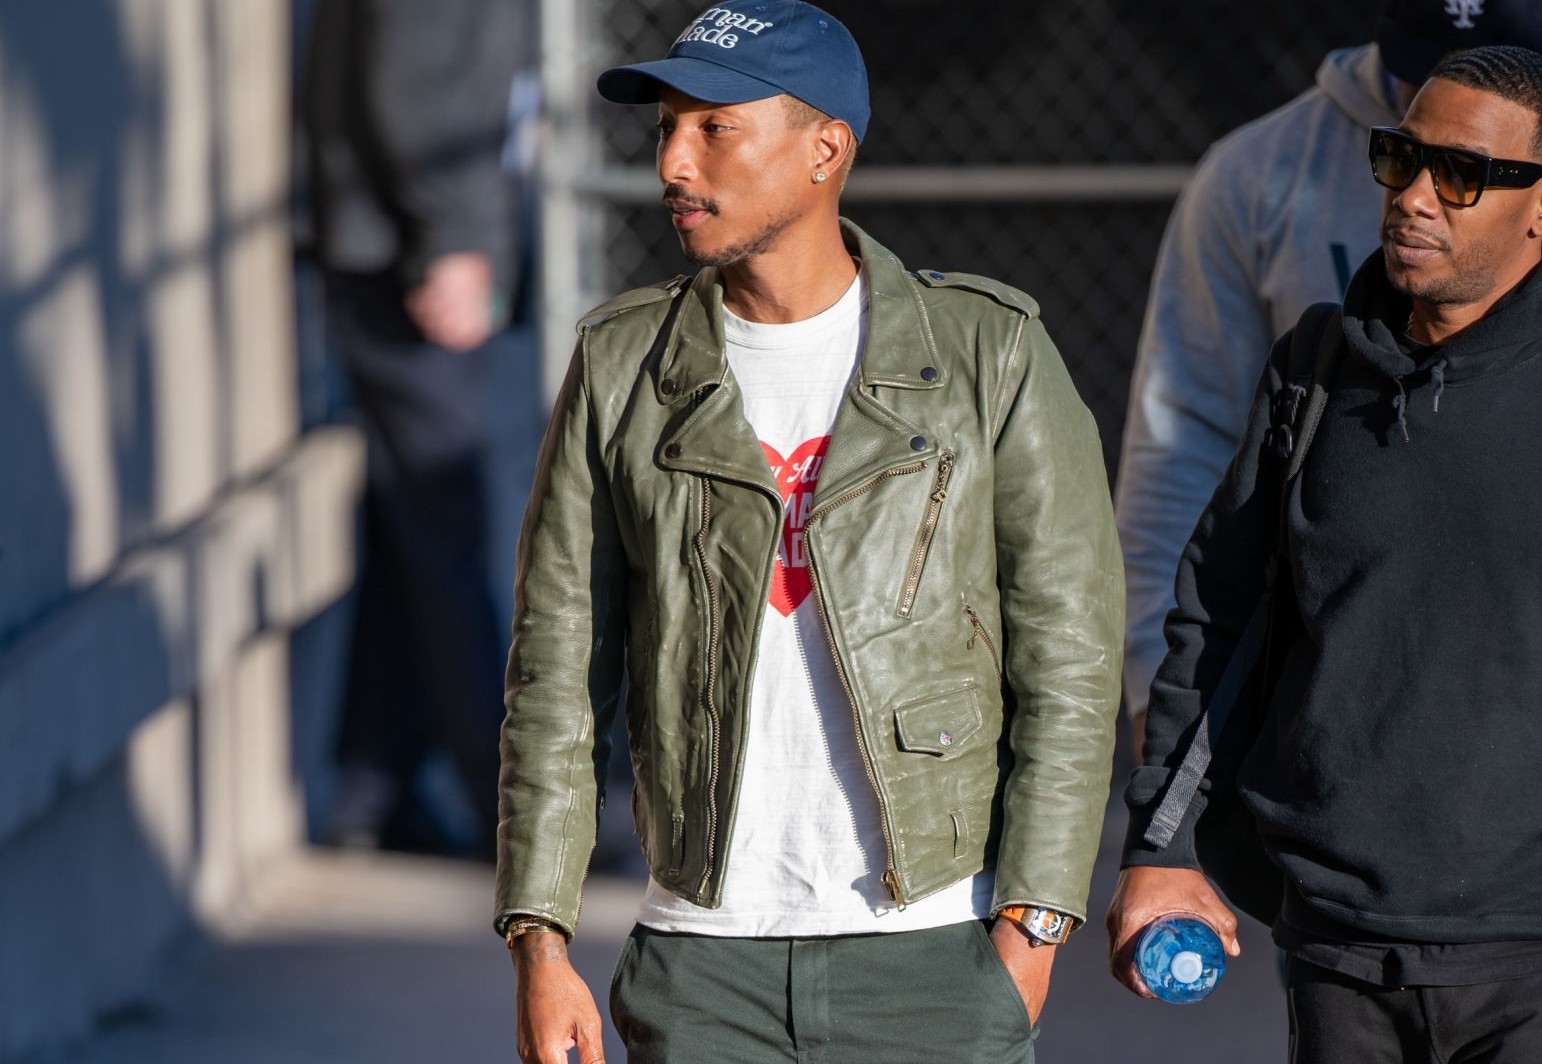 SPOTTED: Pharrell Williams Strolls Through L.A. in Human Made & CPFM